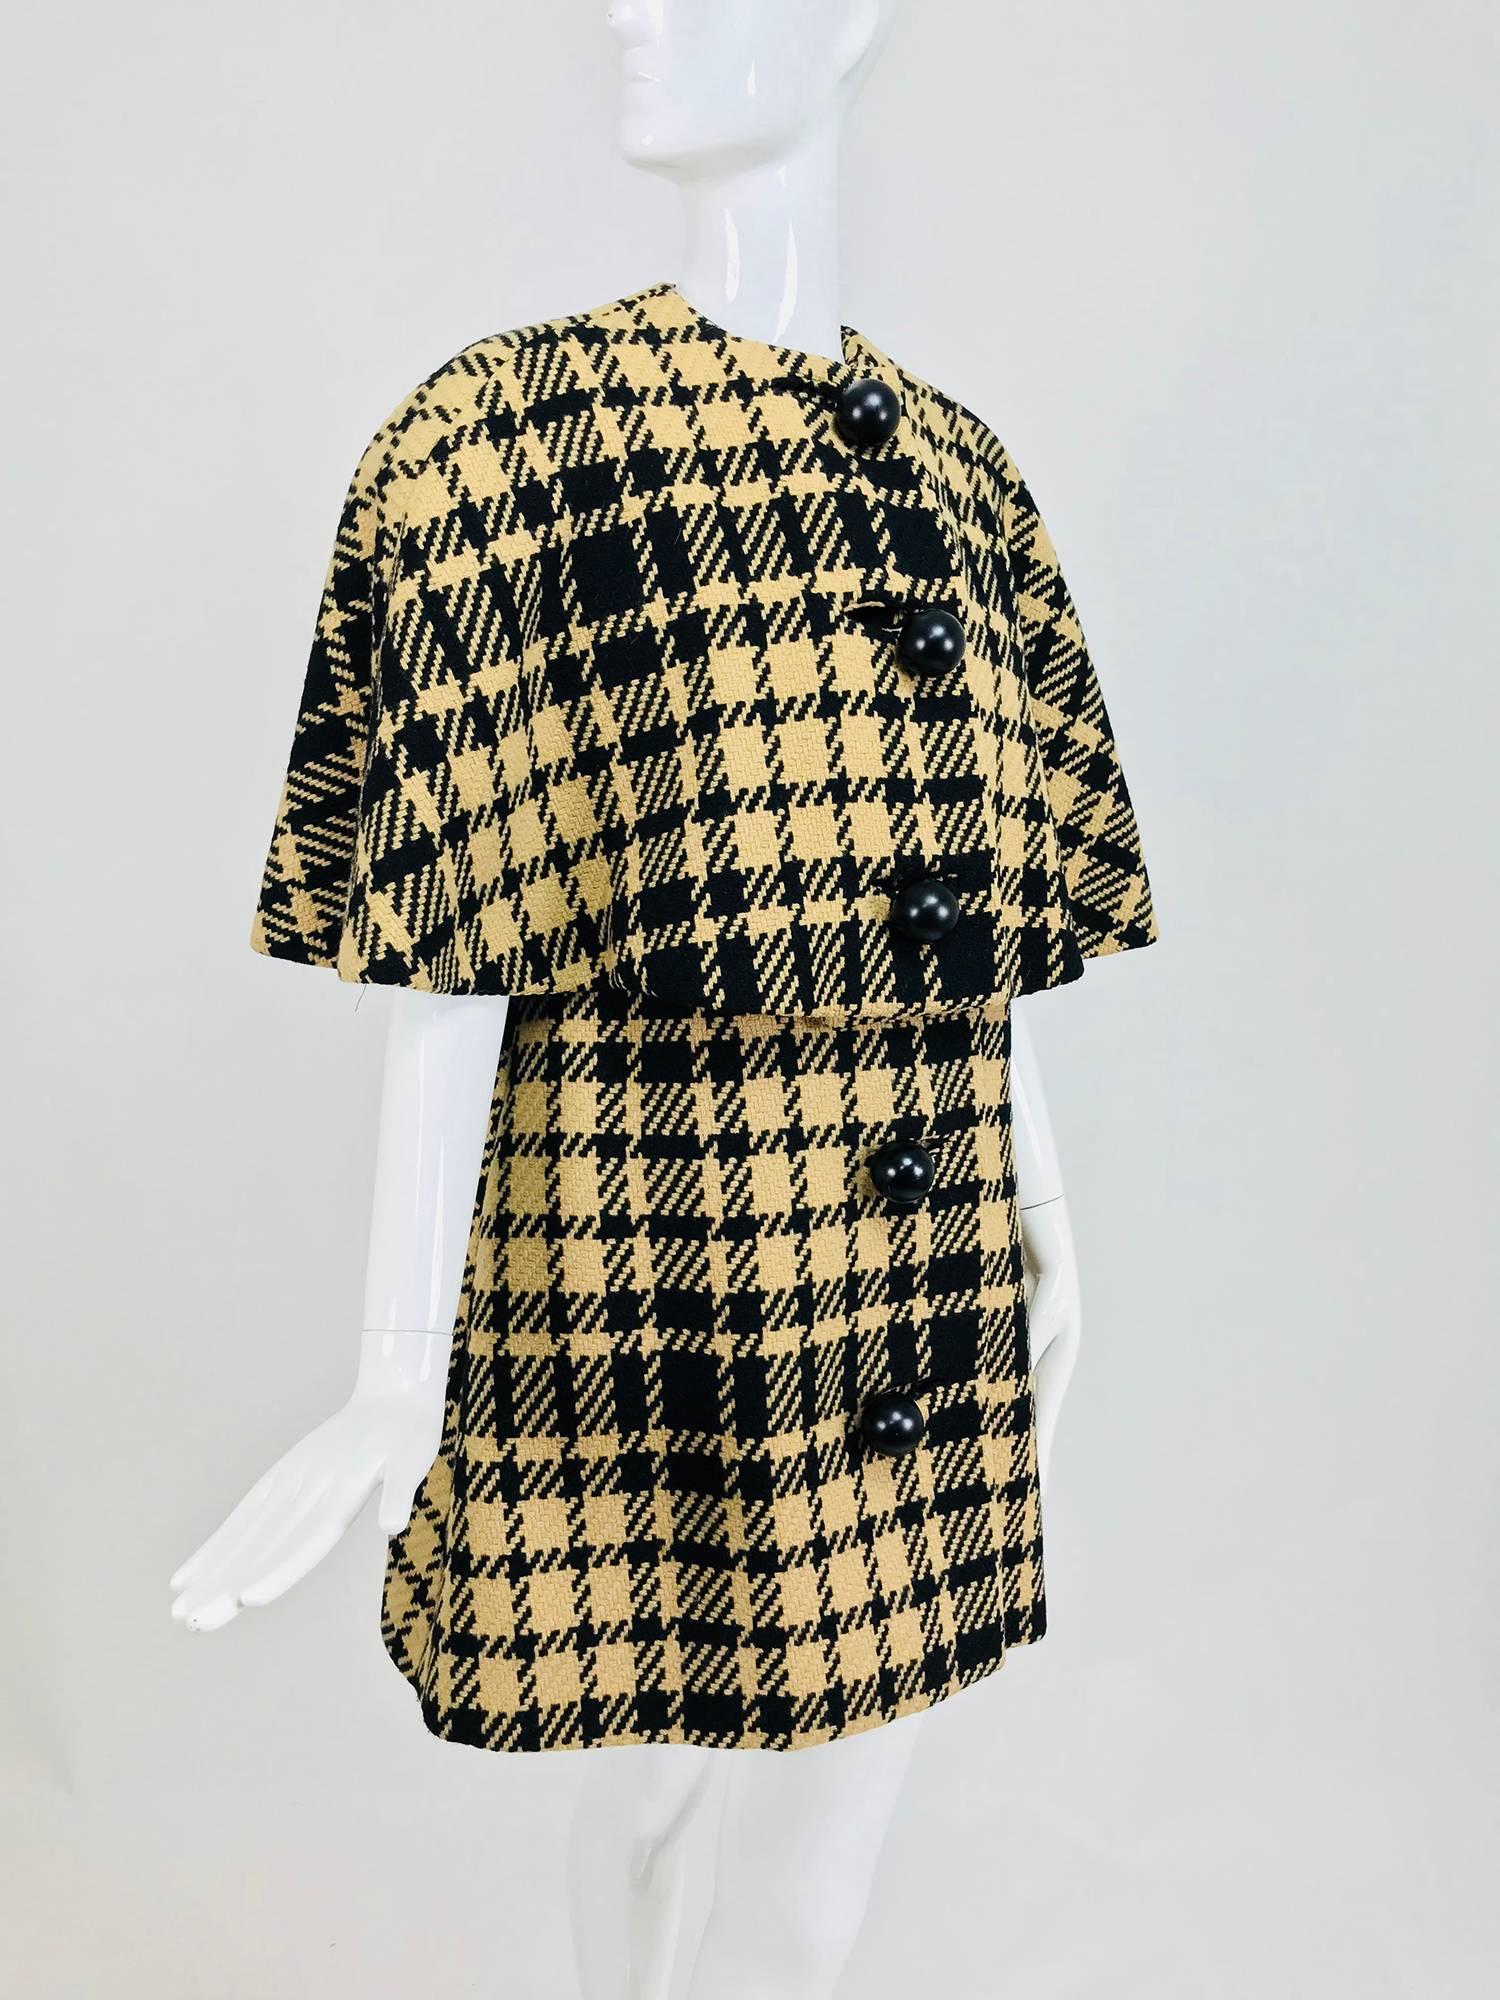 Rudi Gernreich vintage 1960s mod black and tan wool houndstooth plaid mini cape tent coat. Over sized houndstooth pattern is woven in black with a tan ground, the wool is a chunky weave. This piece has fabulous Bakelite buttons, the outer buttons